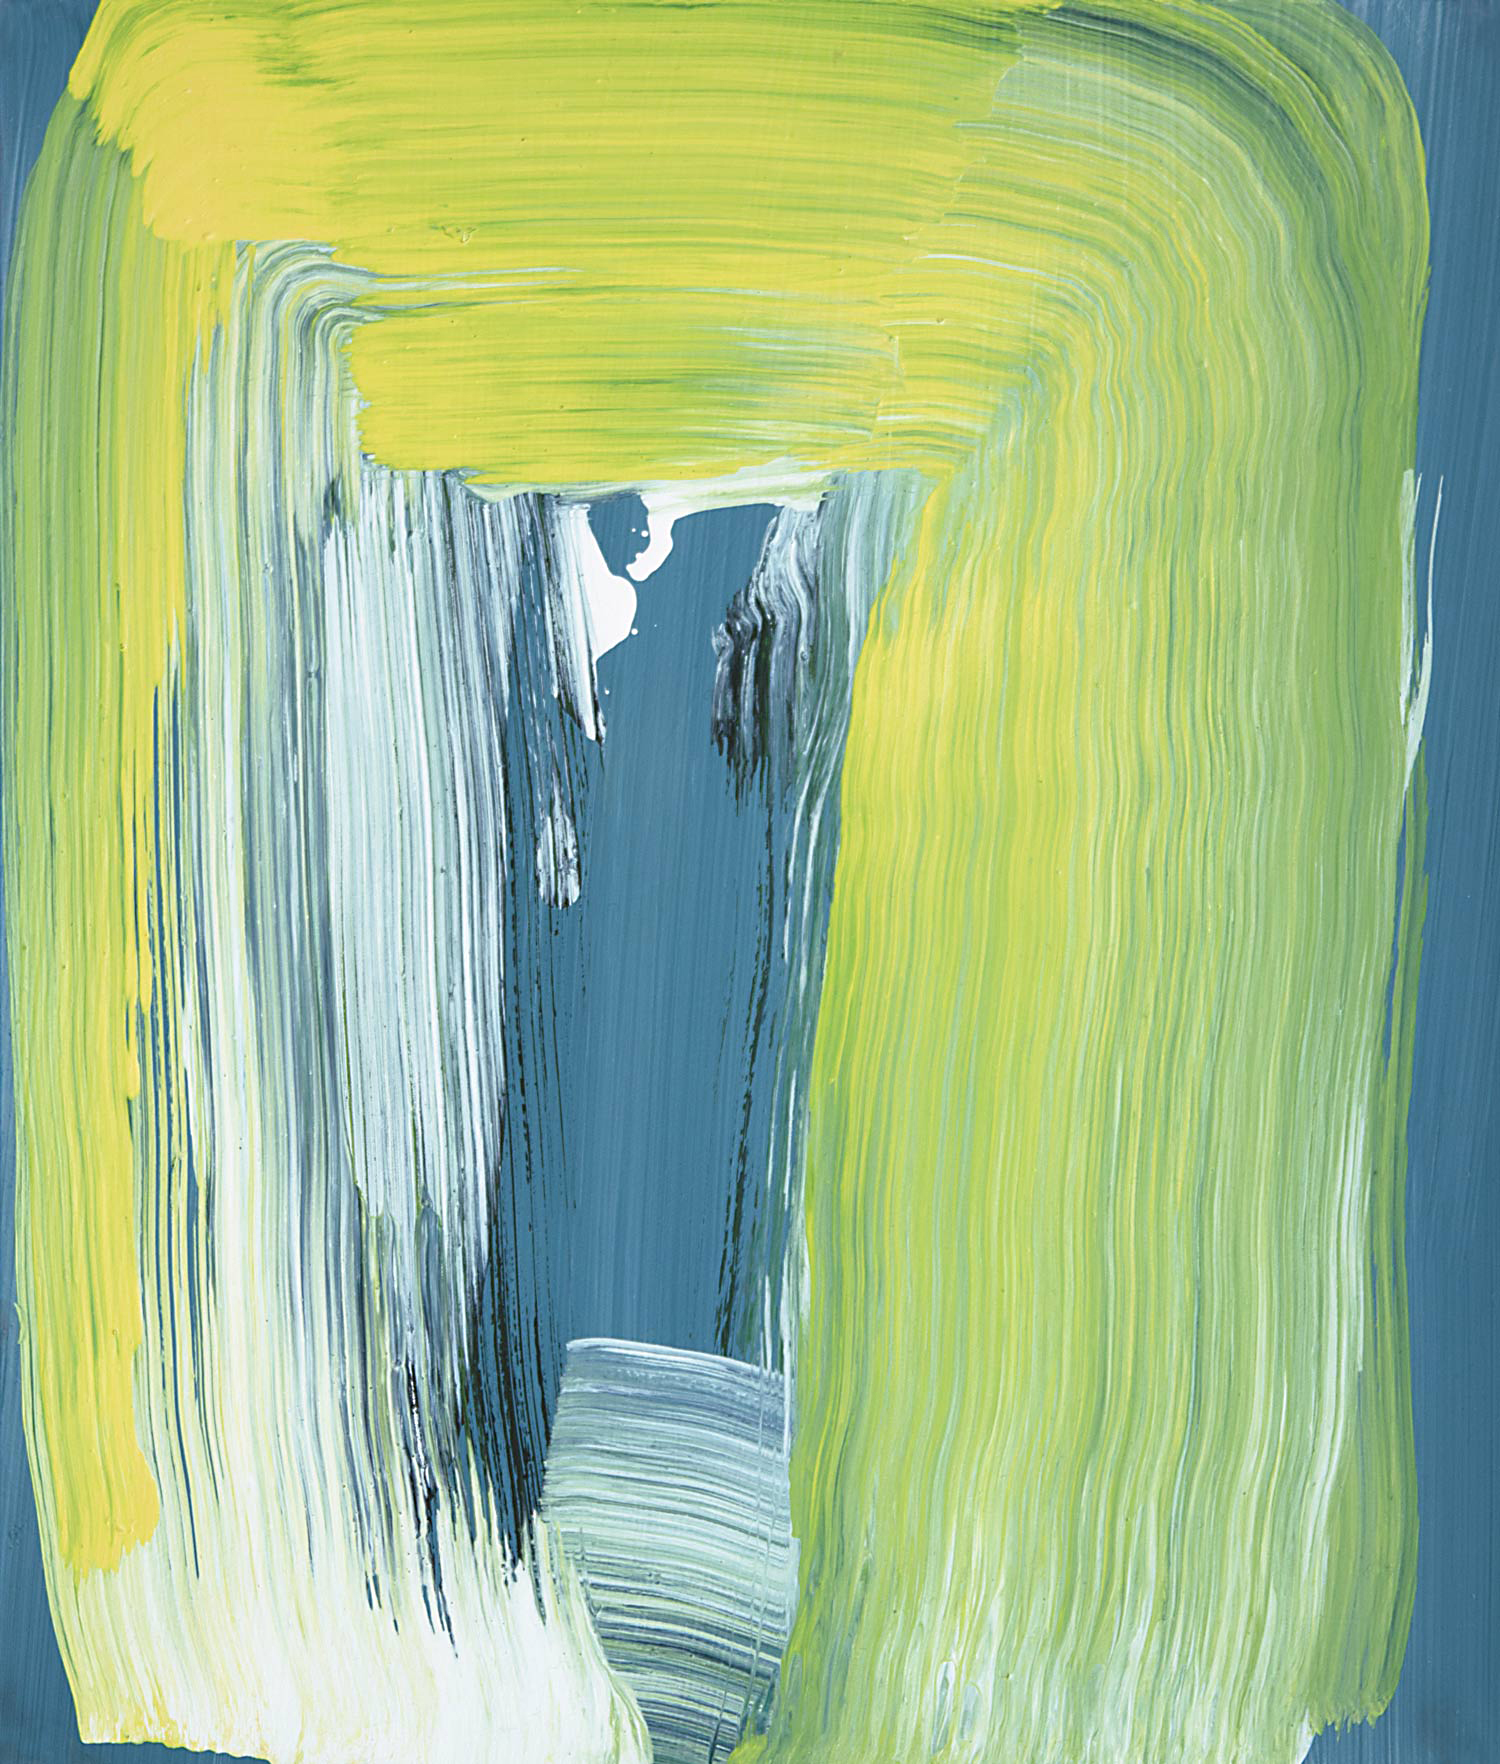   Yellow Frame Swash , 2014 oil on gessoed paper 13.25 x 11.25 in. Private Collection 